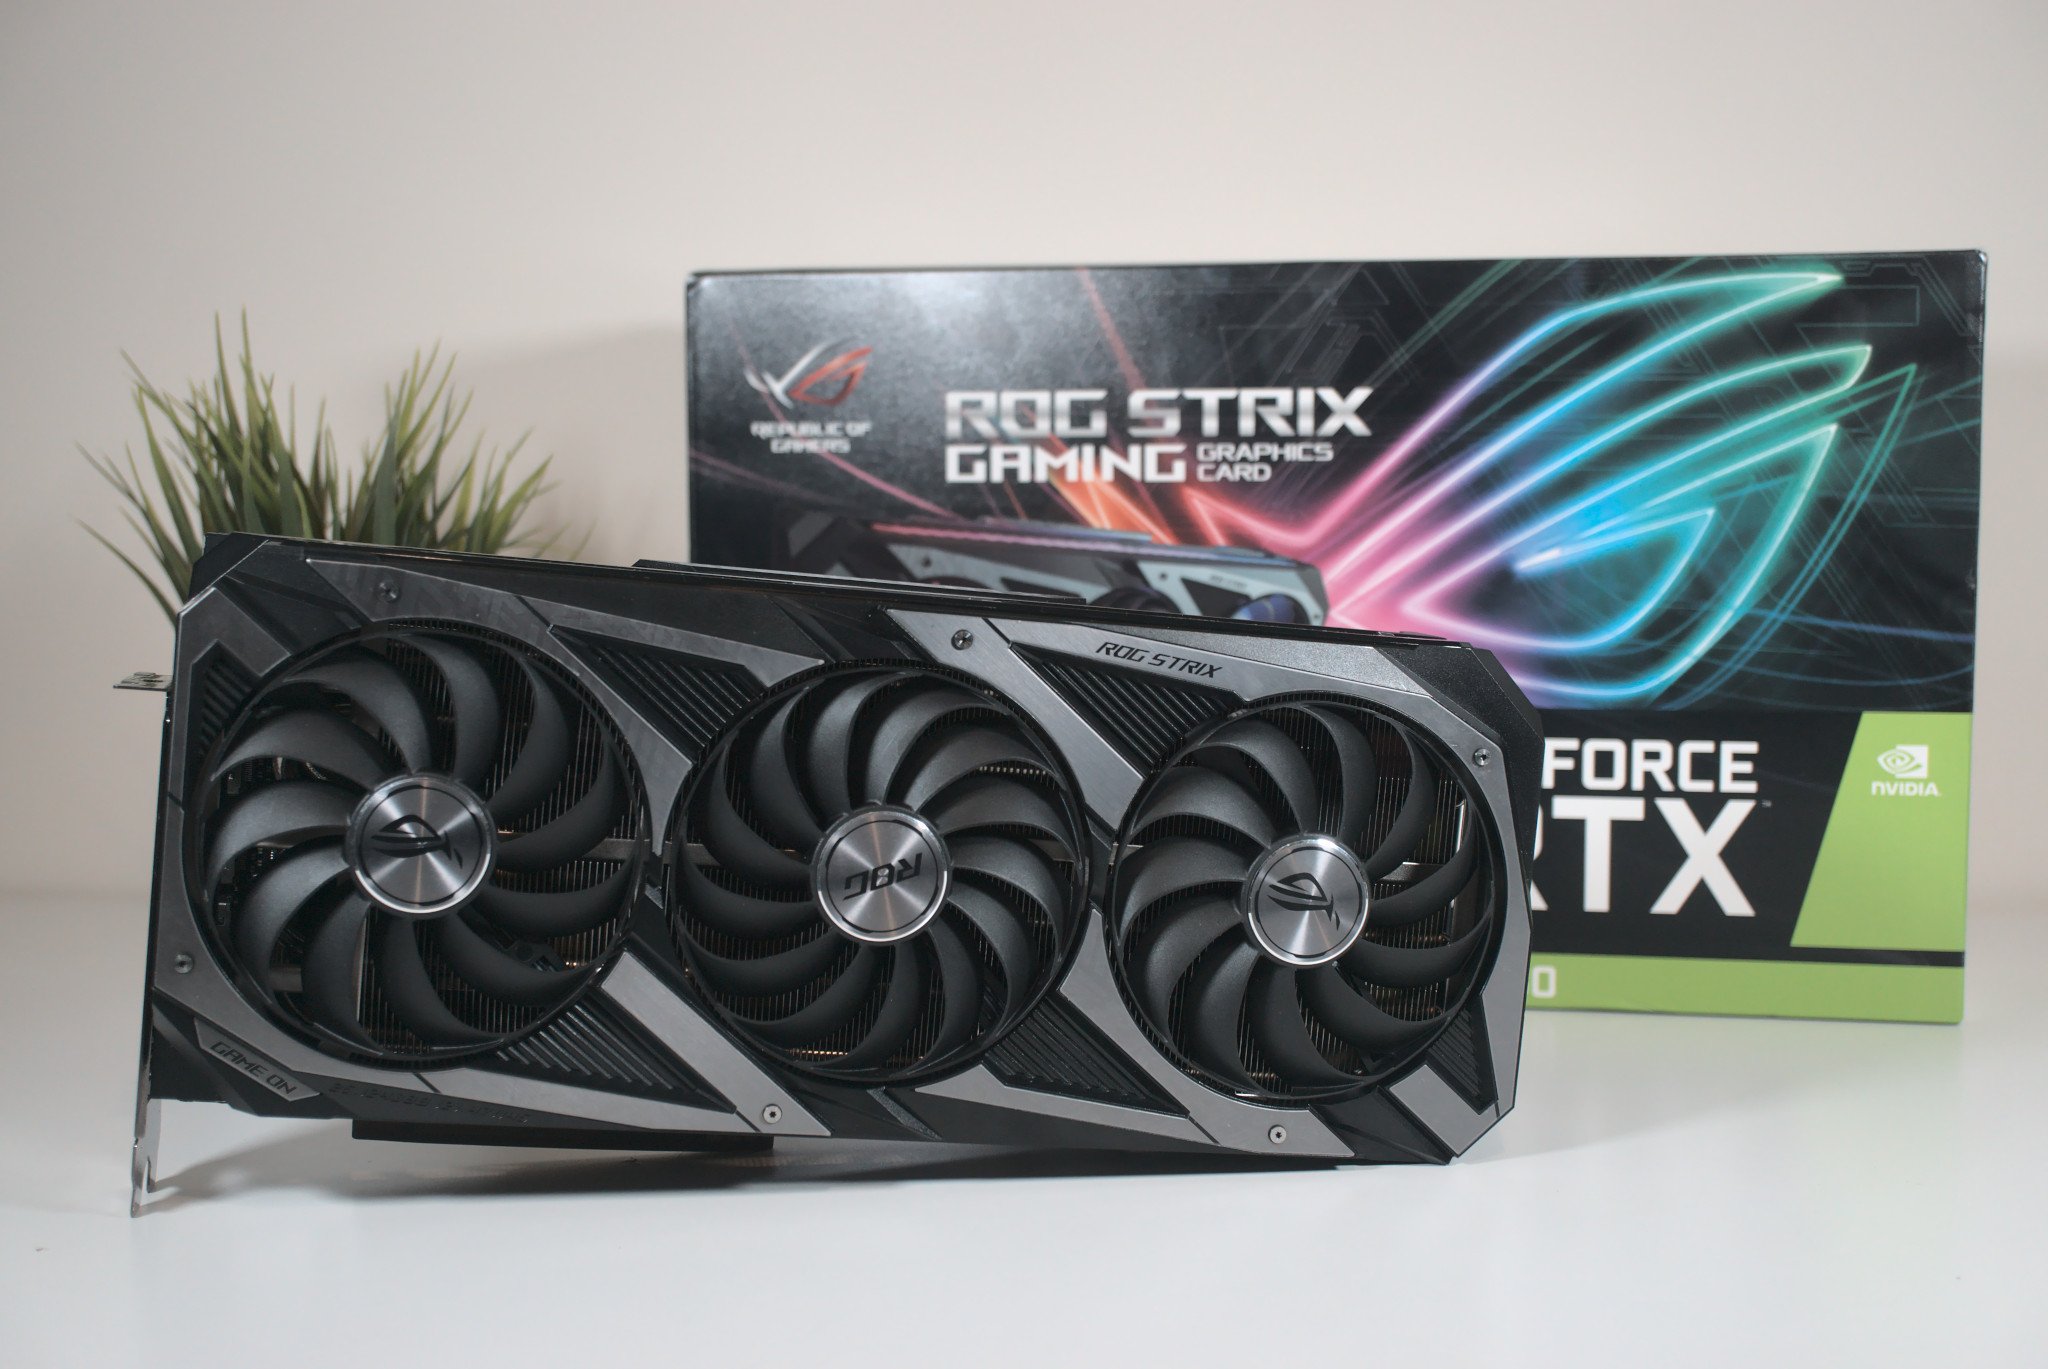 ASUS ROG Strix GeForce RTX 3080 review: The best value GPU for 4K